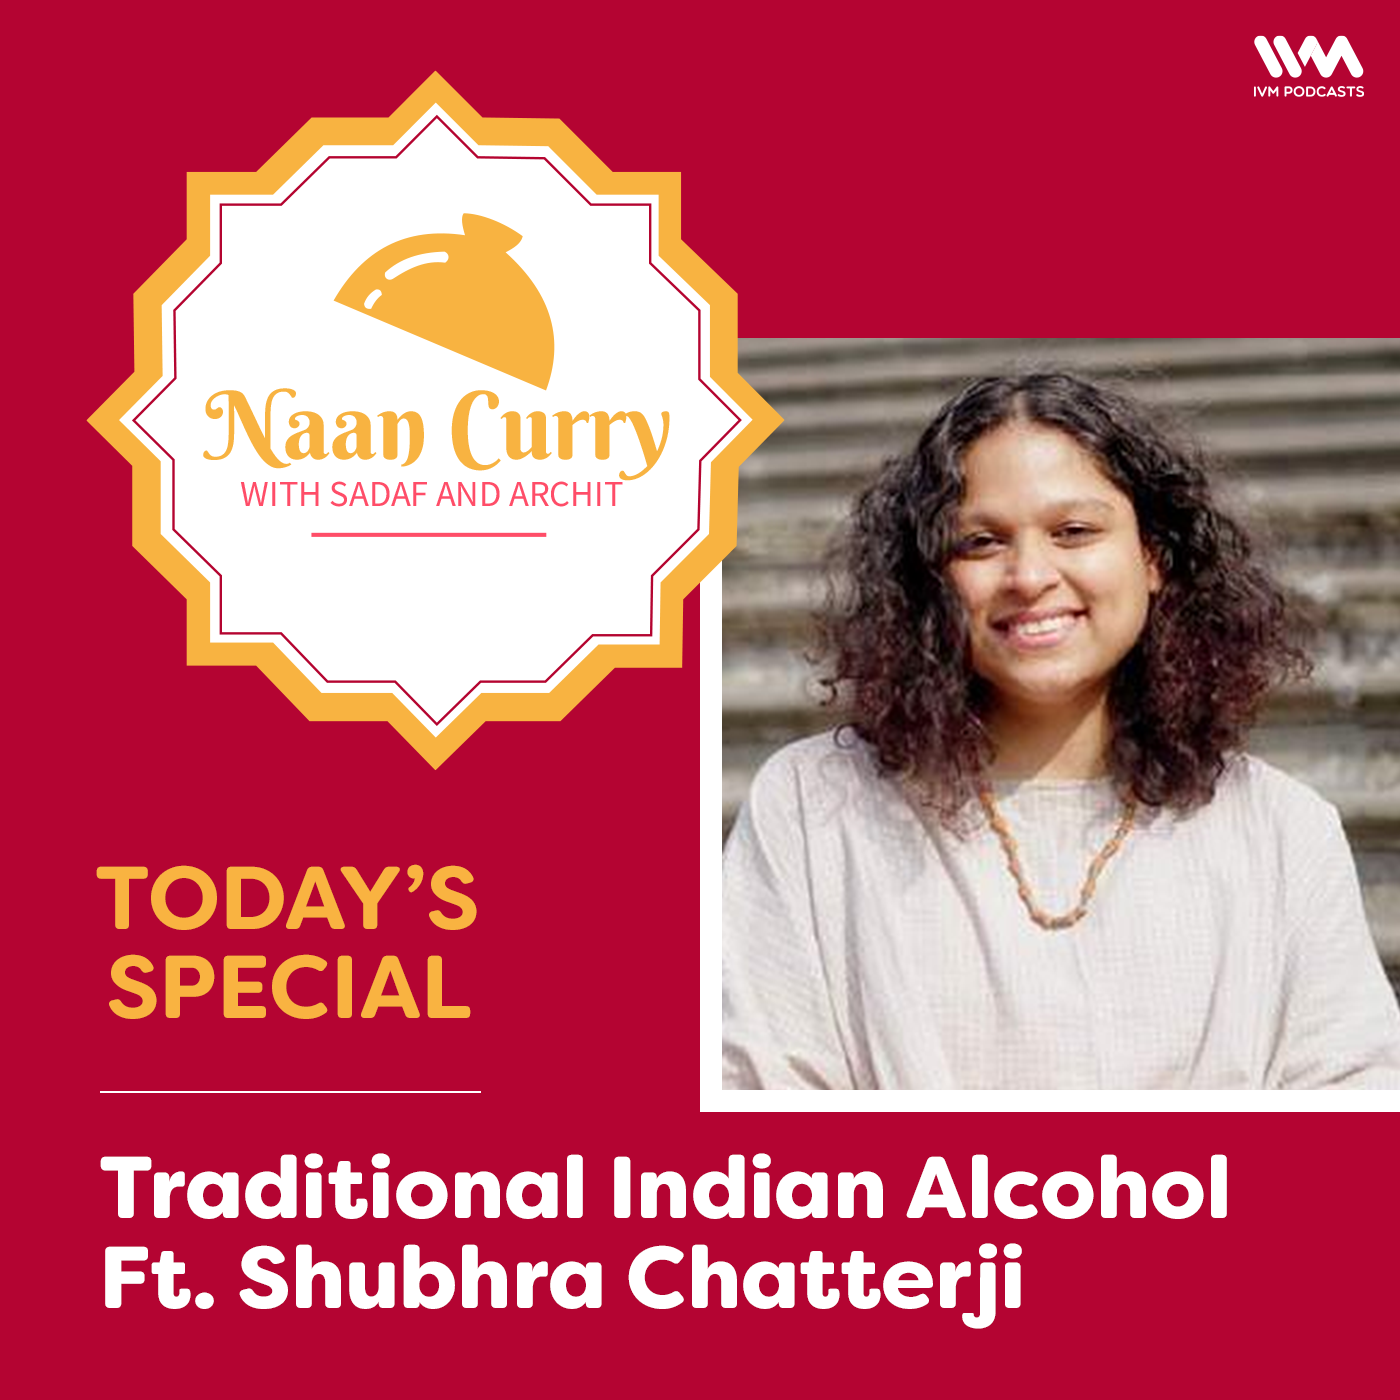 Traditional Indian Alcohol featuring Shubhra Chatterji